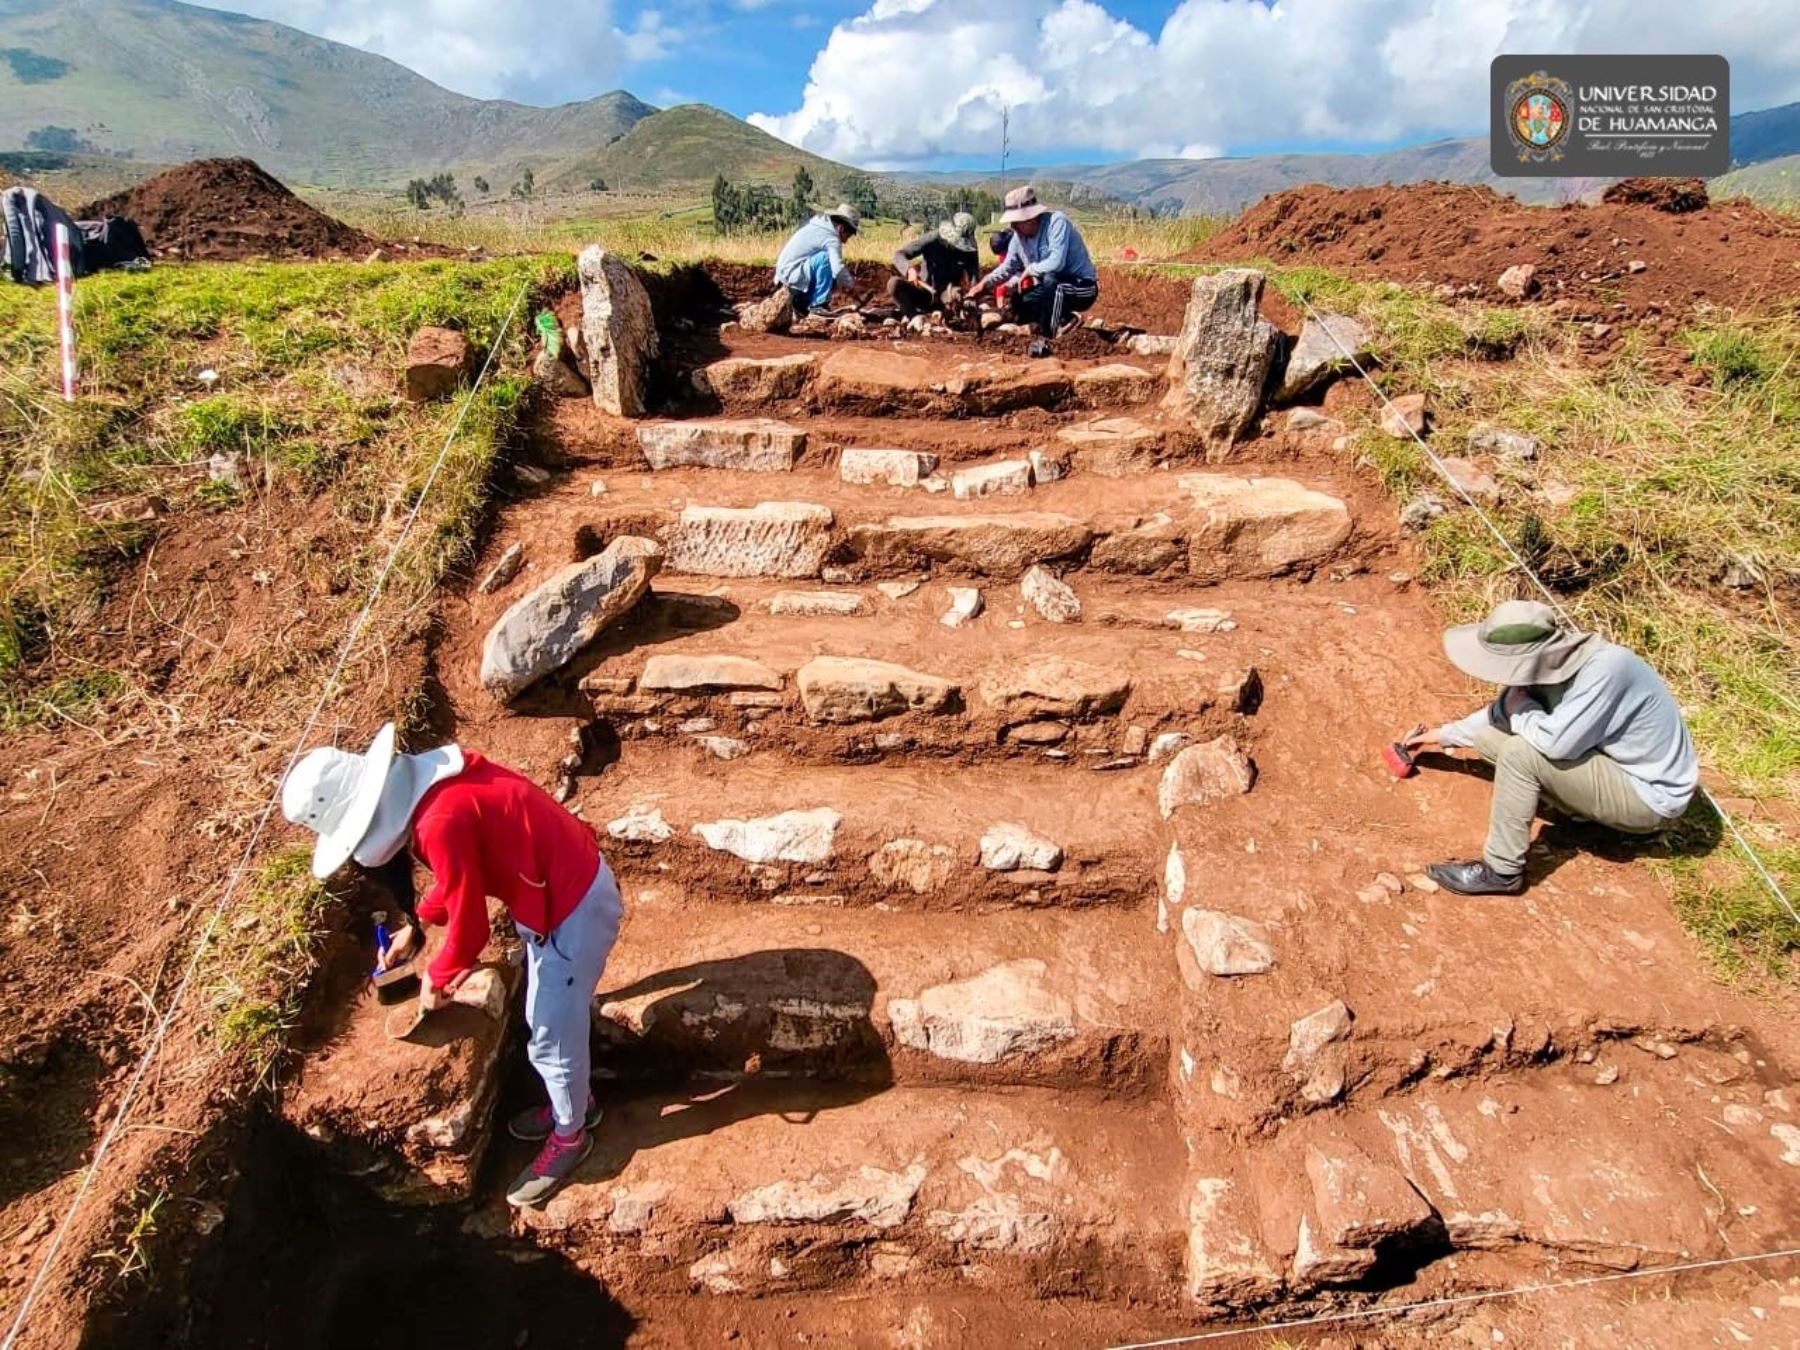 Peru: Archaeologists discover 3,000-year-old ceremonial center in Apurimac region